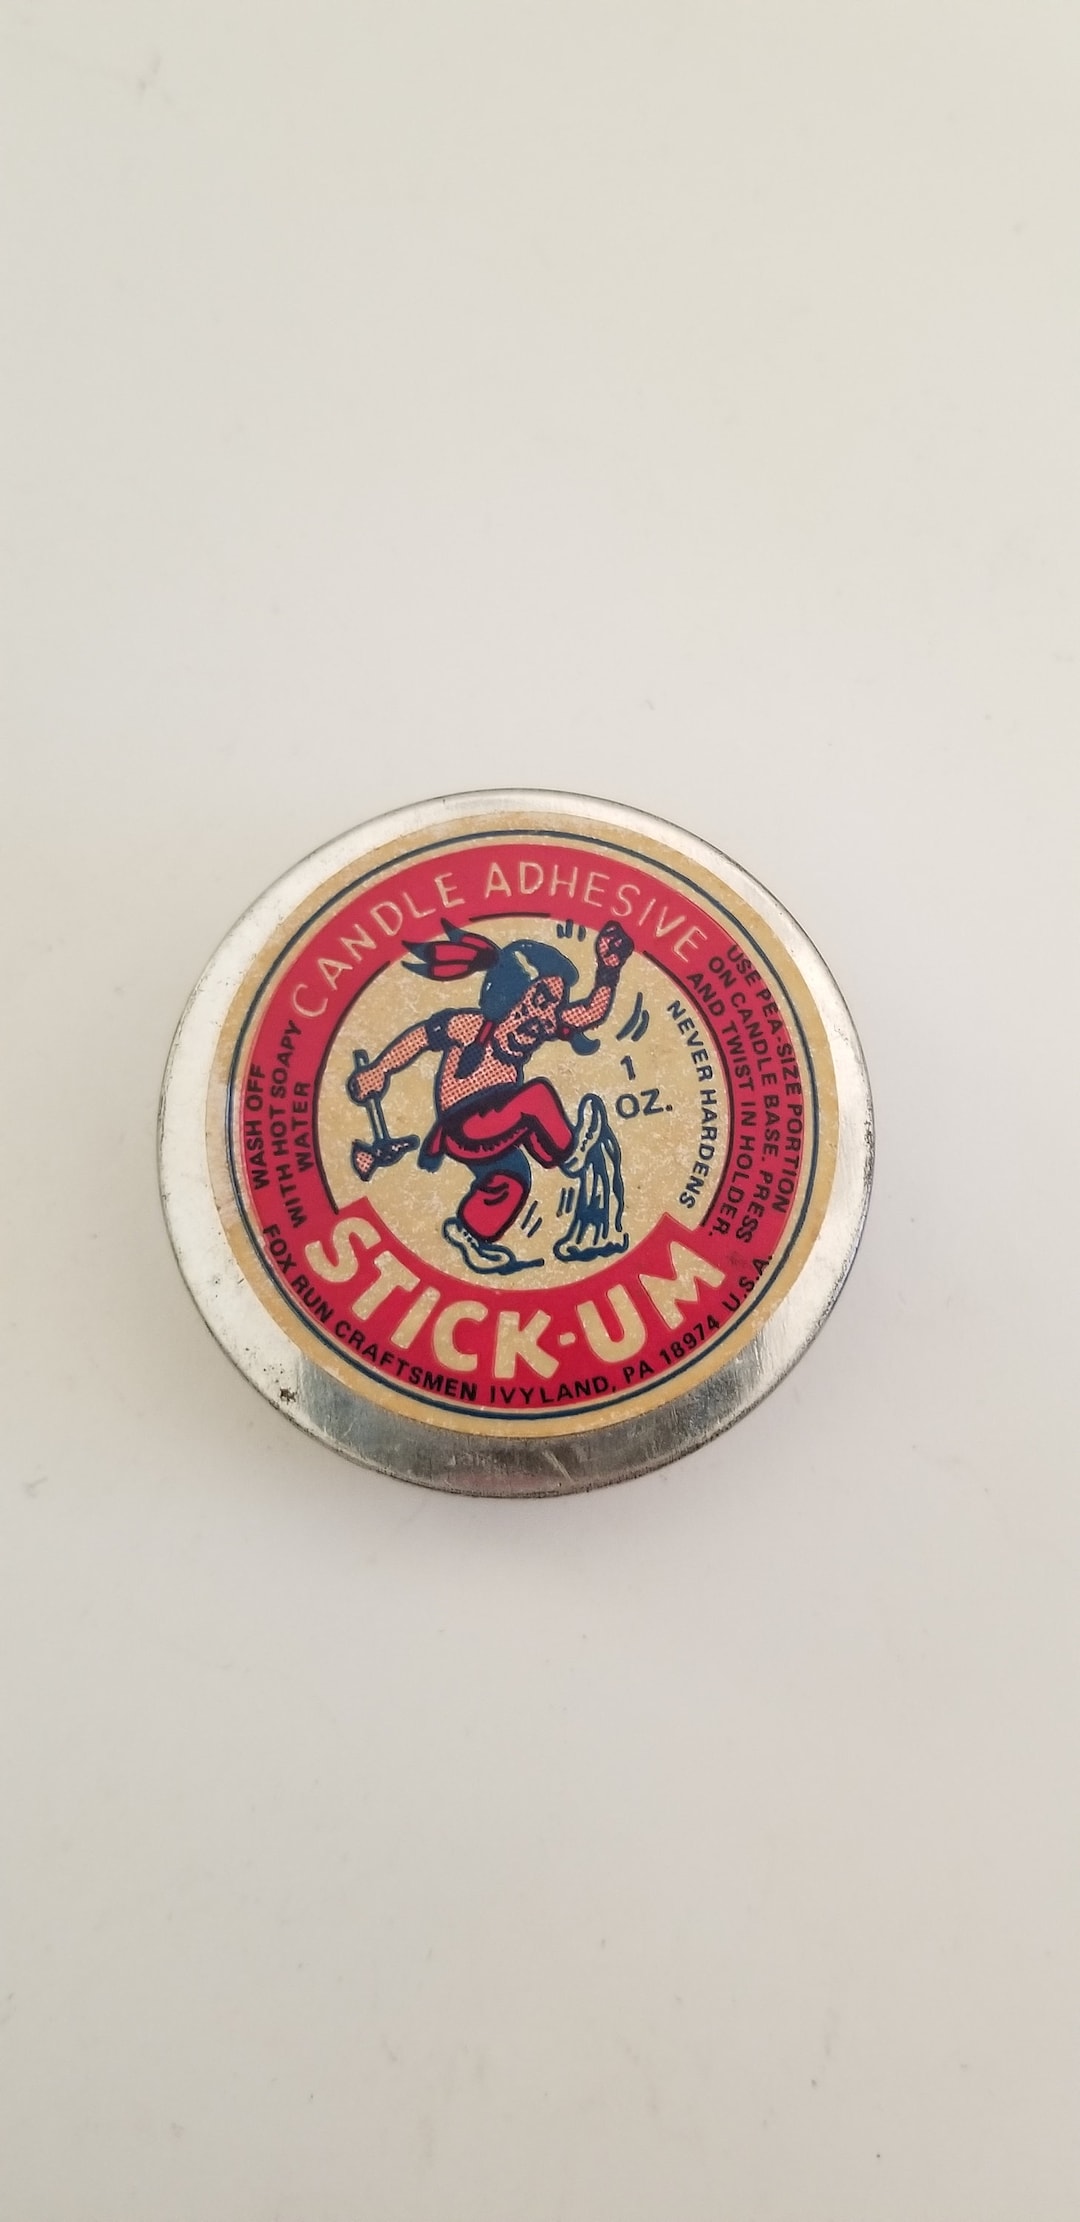 Vintage Stick-Um Candle Adhesive American Indian Graphic Tin